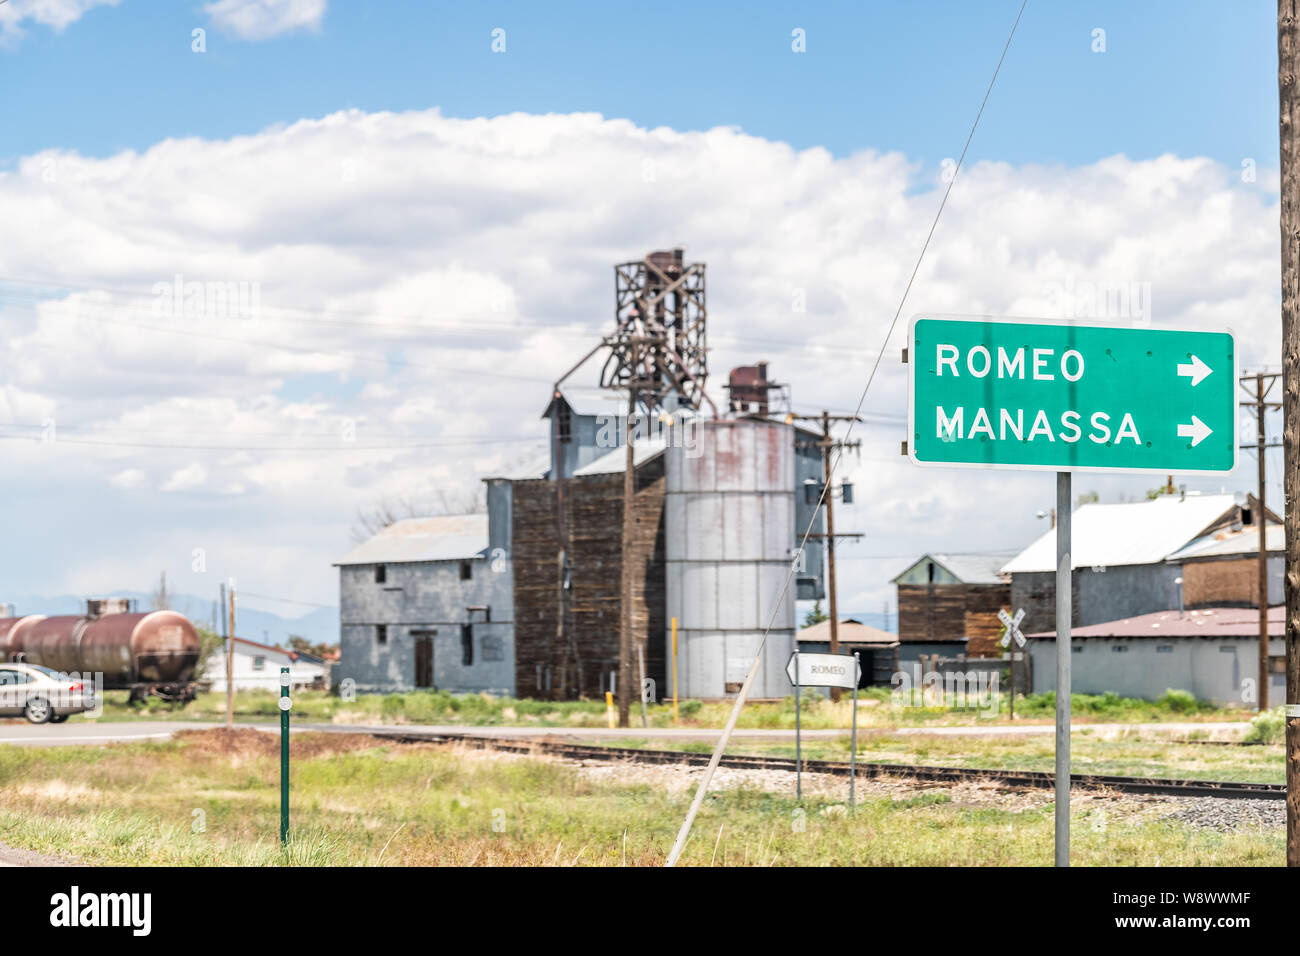 Romeo, USA - June 20, 2019: Highway 285 in Colorado with old vintage town industrial building and sign for Romeo and Manassa Stock Photo